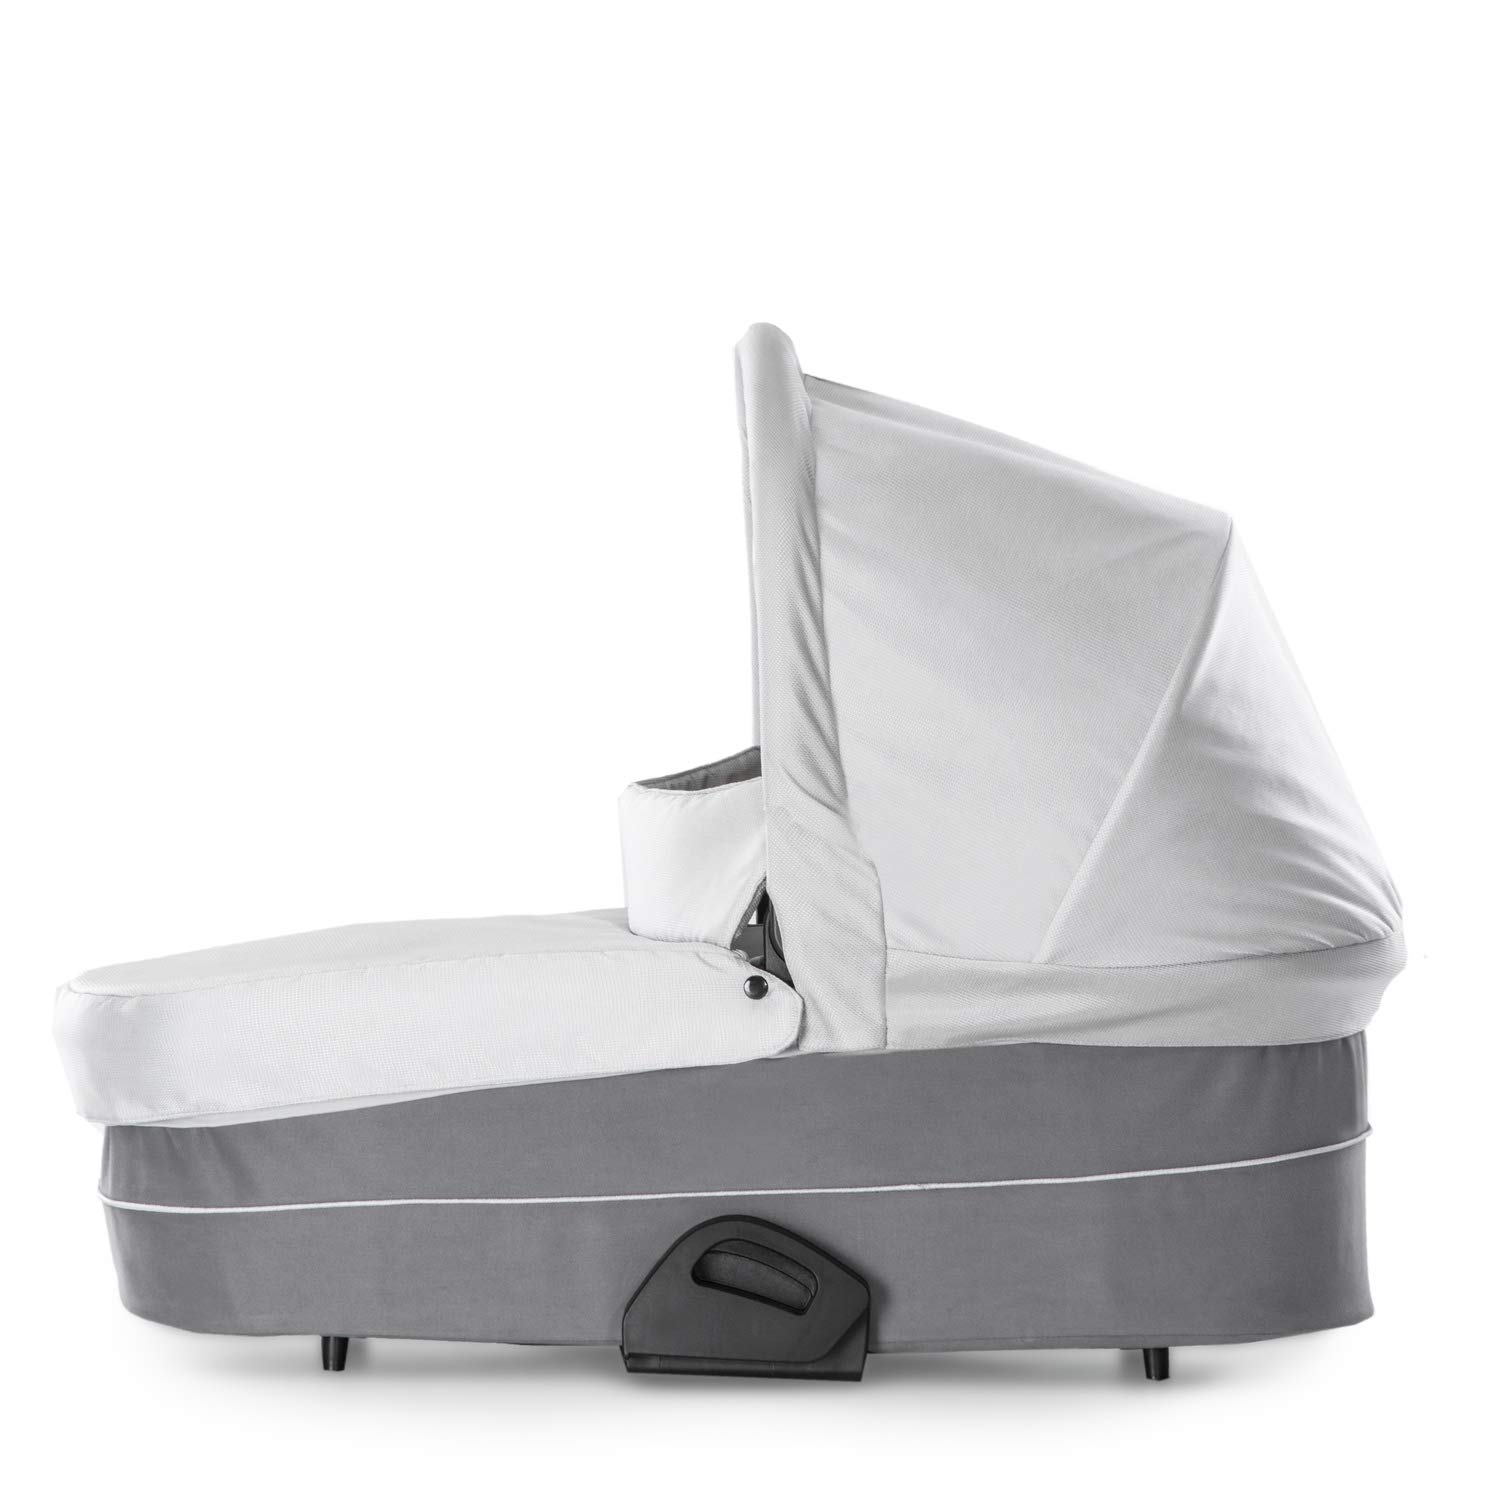 Hauck Baby Bath for Saturn R or Mars Combi Pushchair / for Babies from Birth to 9 kg / Includes Soft Mattress / Window with Ventilation / Stable / Large Sun Canopy / Foldable / Grey